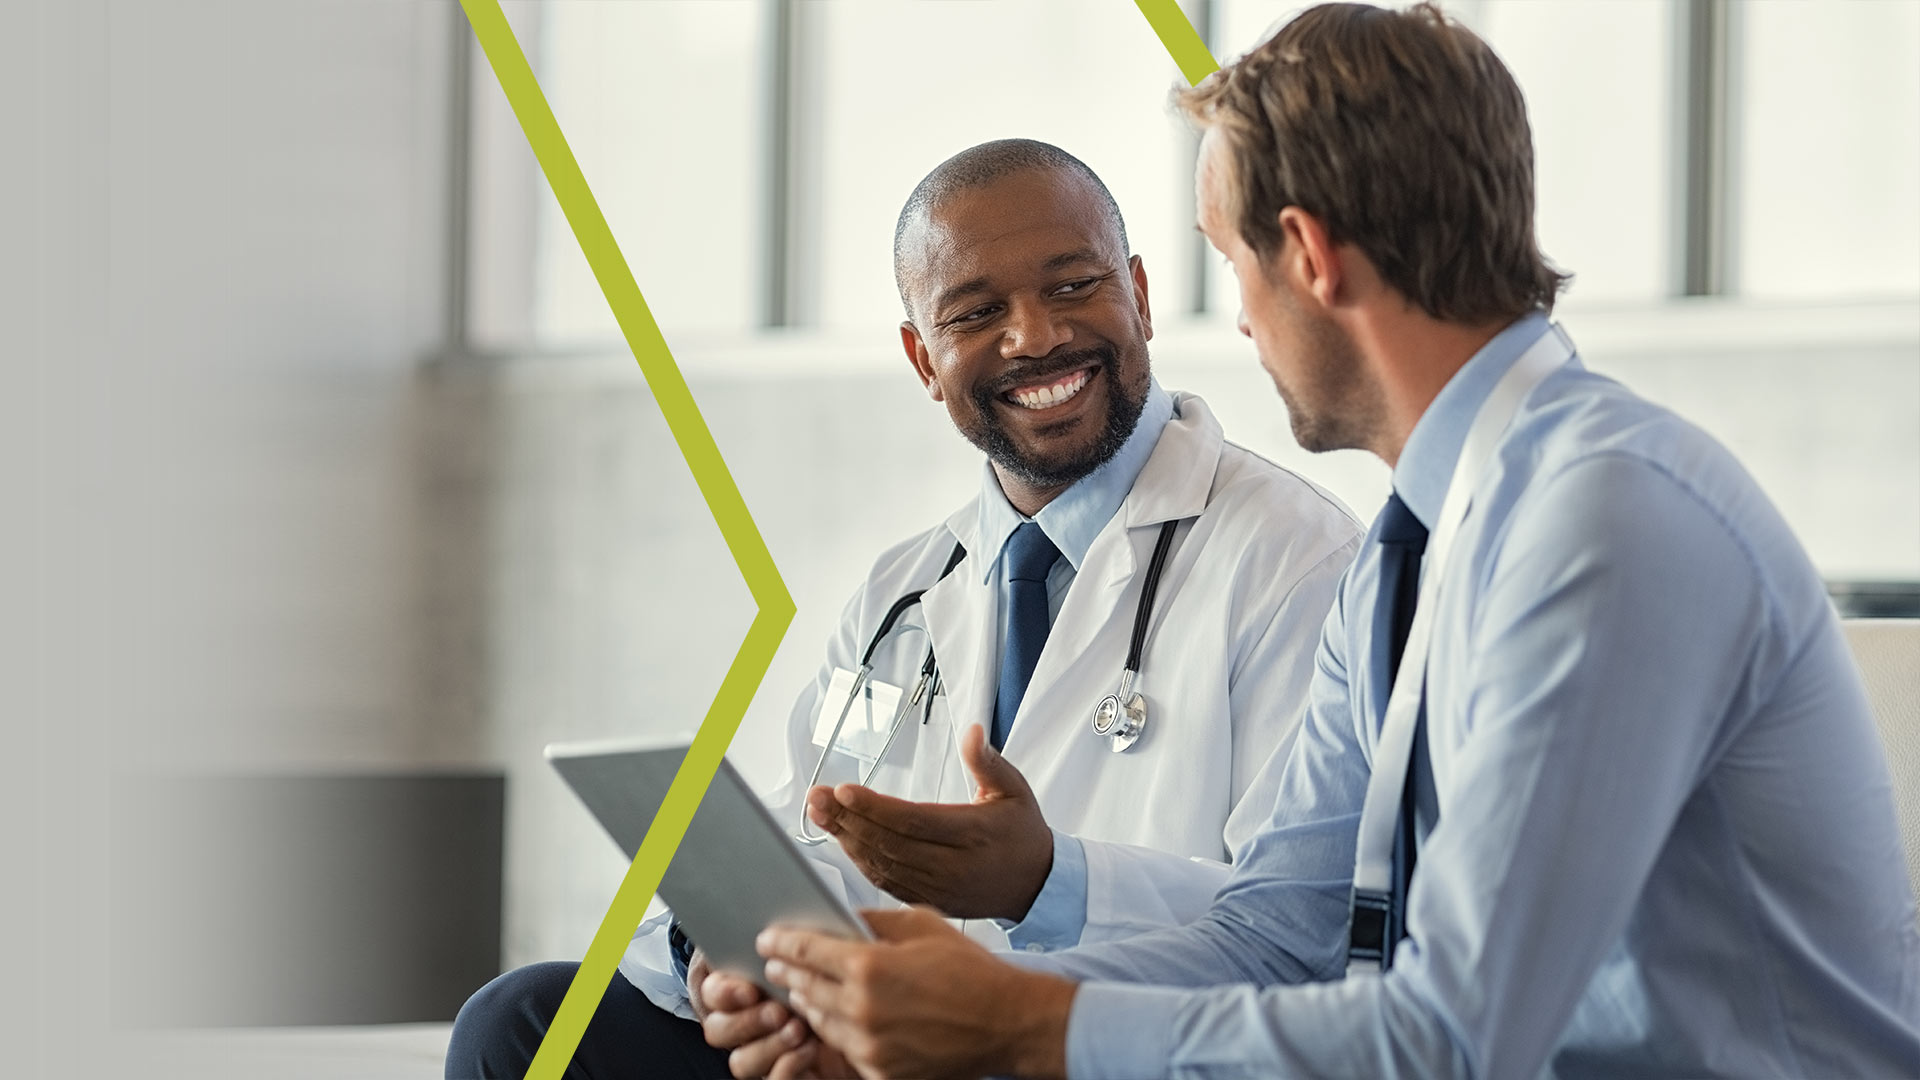 SCP Health - Our Clinical Integration Services streamline processes while aligning departments through our Clinical Management and Integrated Medicine Solutions.